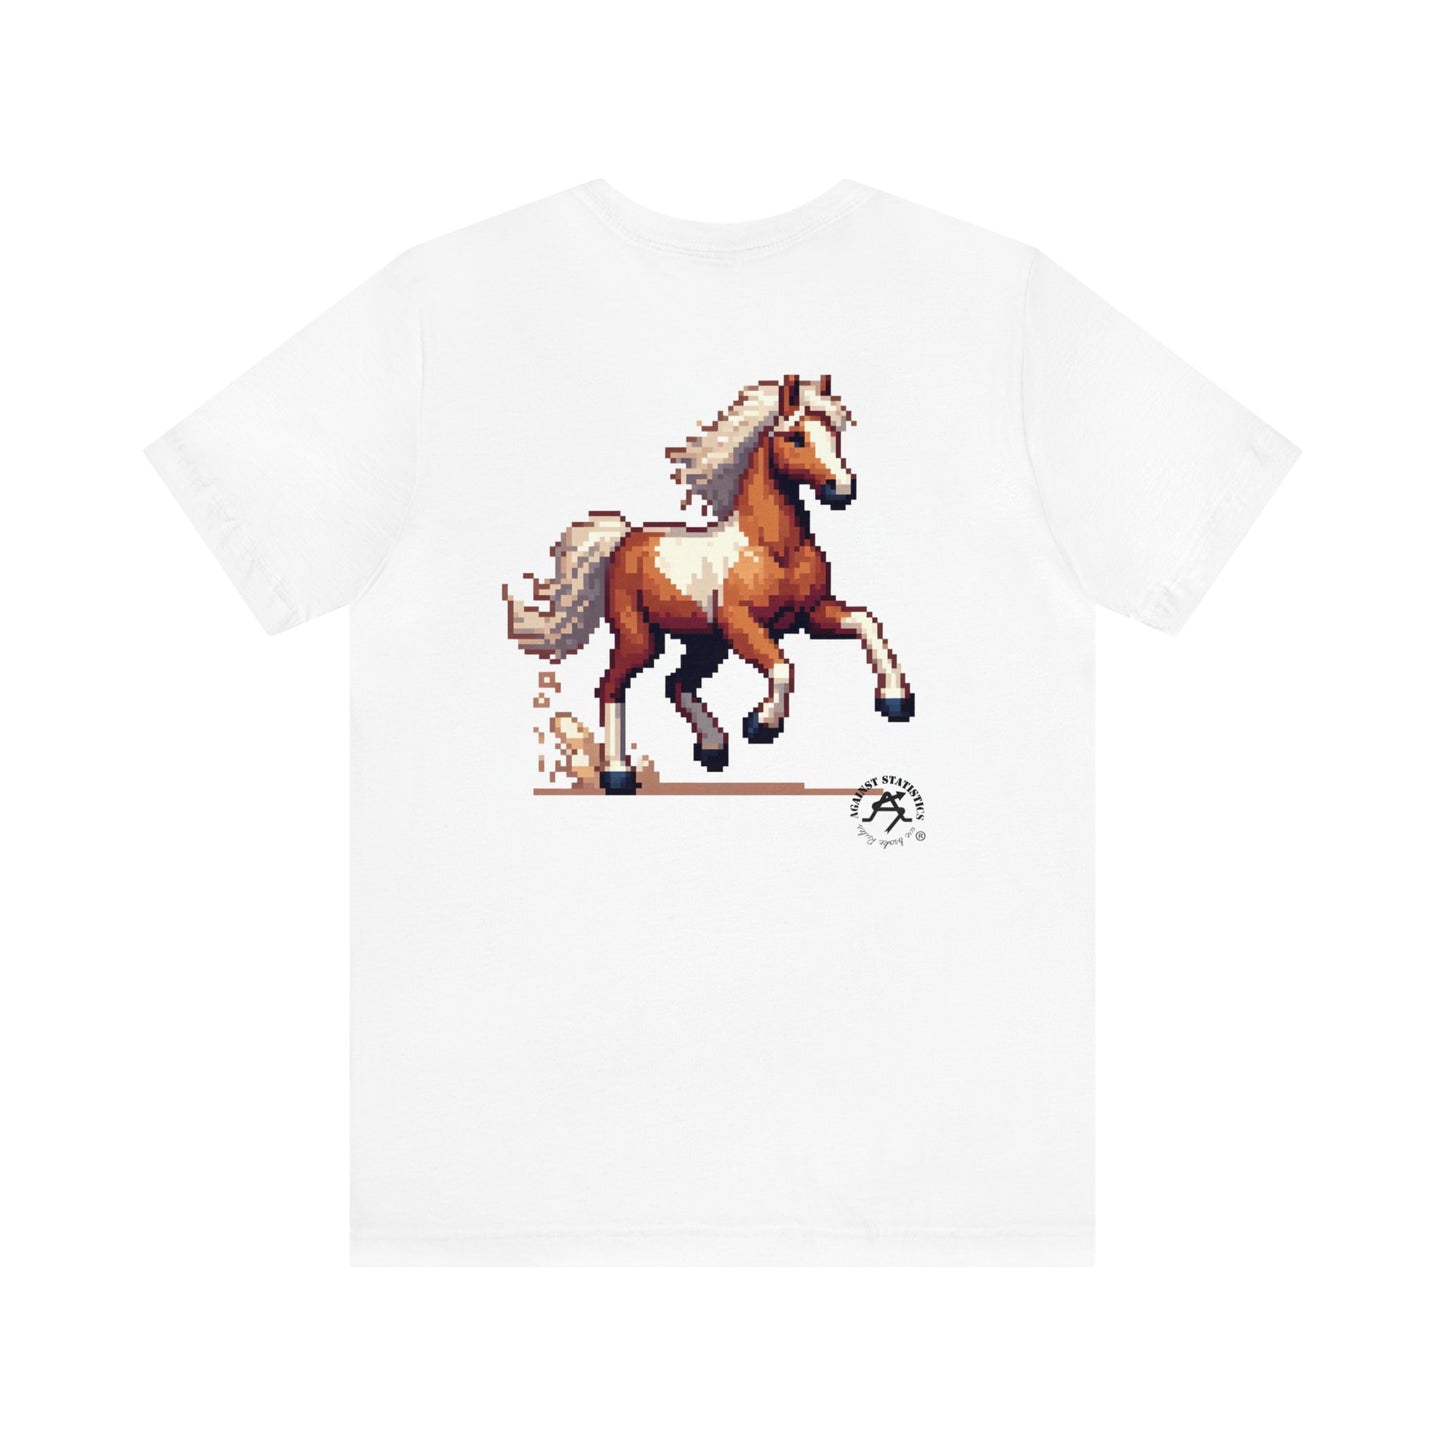 Unisex Jersey Short Sleeve Tee - Play the Game Horses